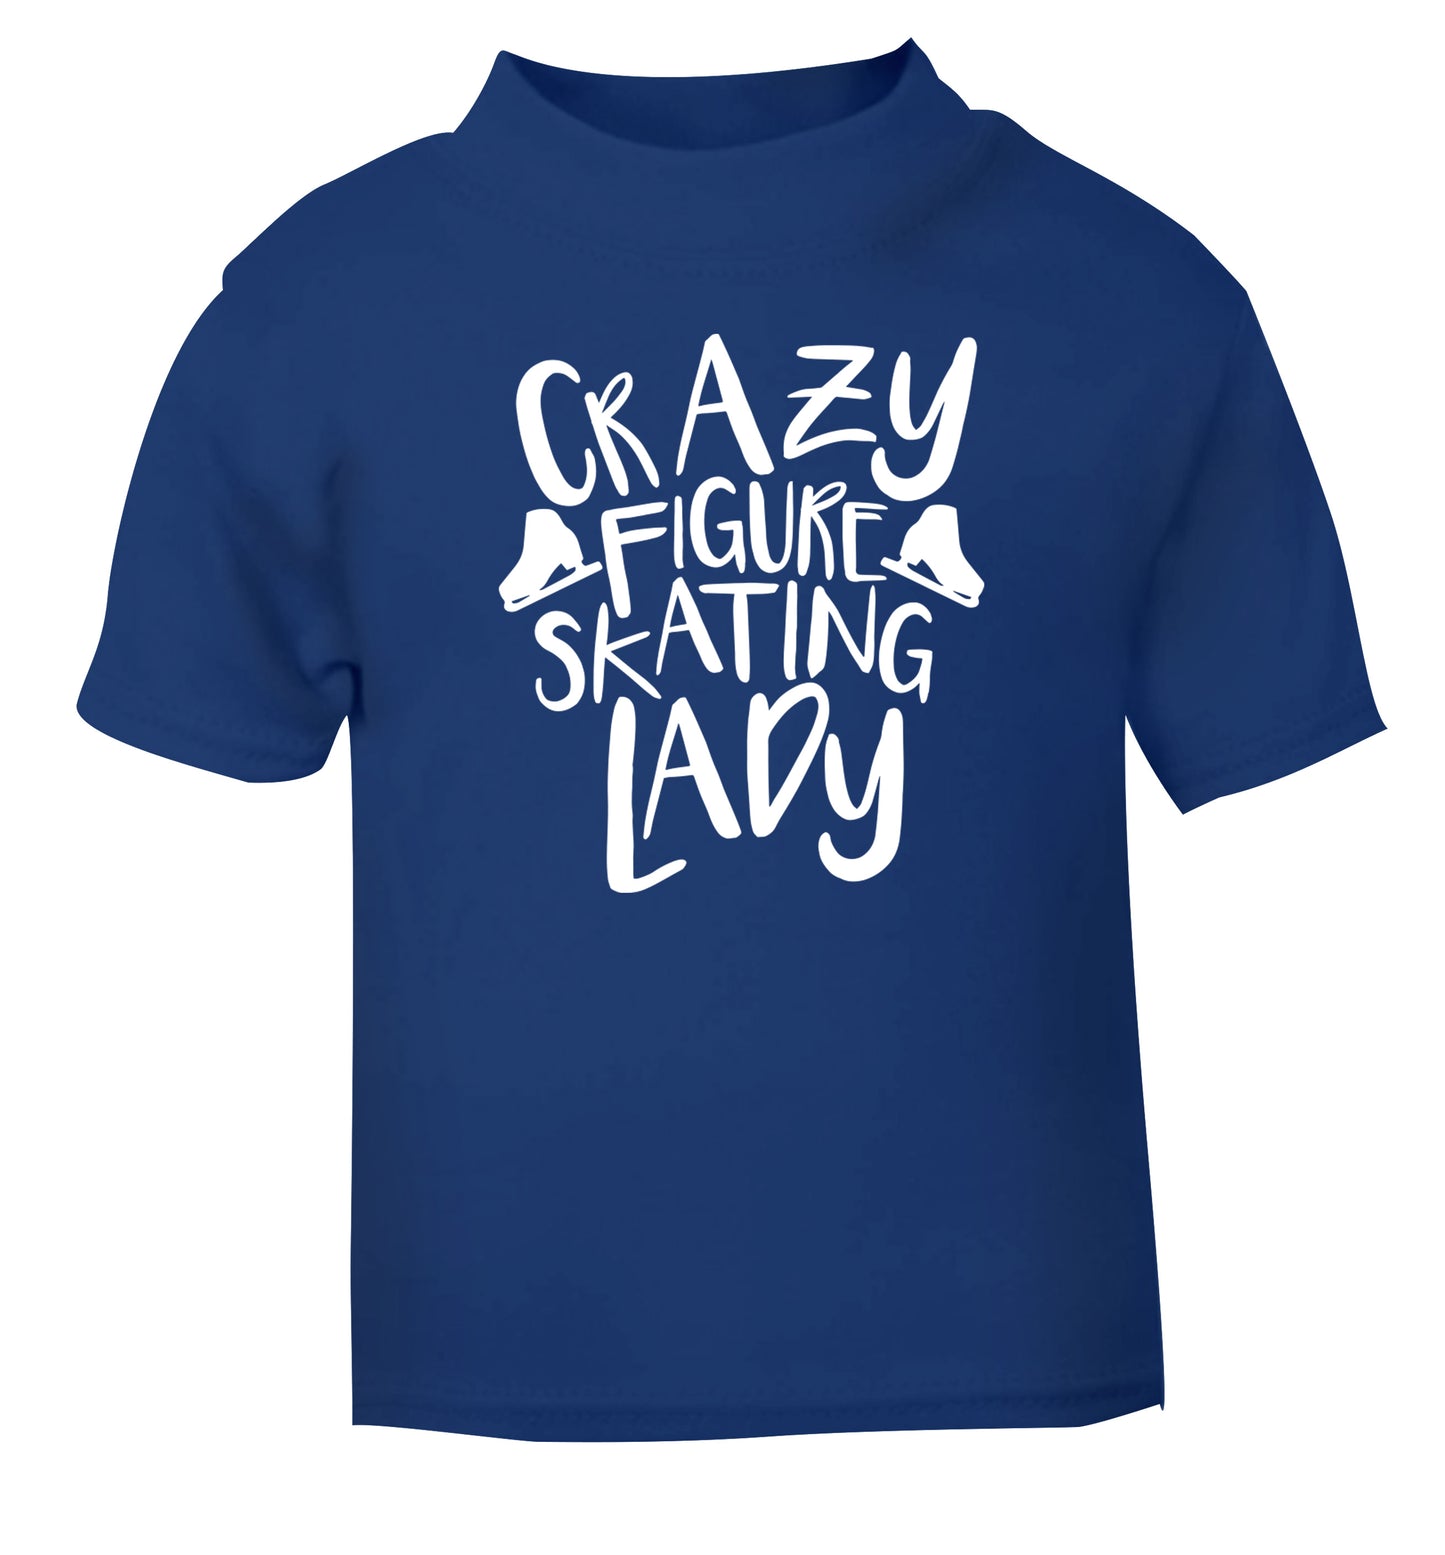 Crazy figure skating lady blue Baby Toddler Tshirt 2 Years